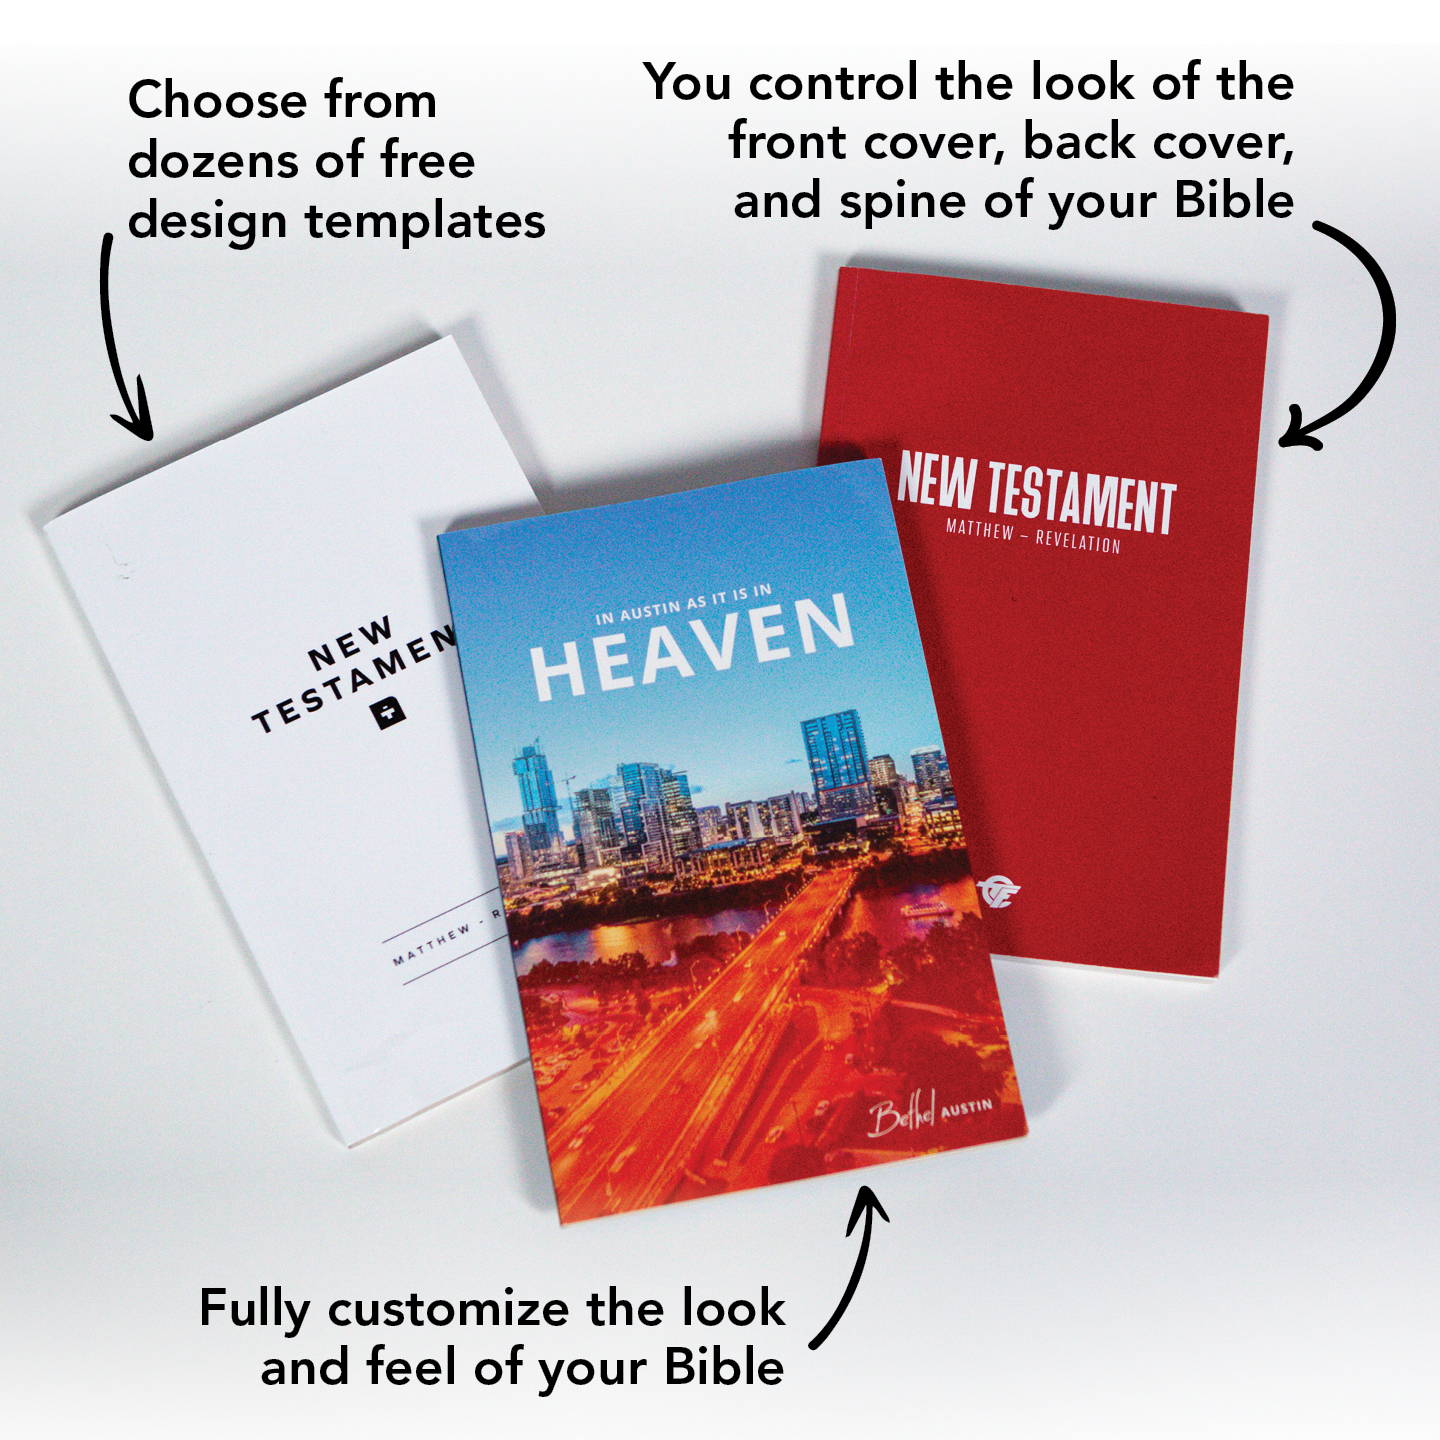 Choose from dozens of free design templates. You control the look of the front cover, back cover, and spine. Fully customize the look at feel of your Bible.